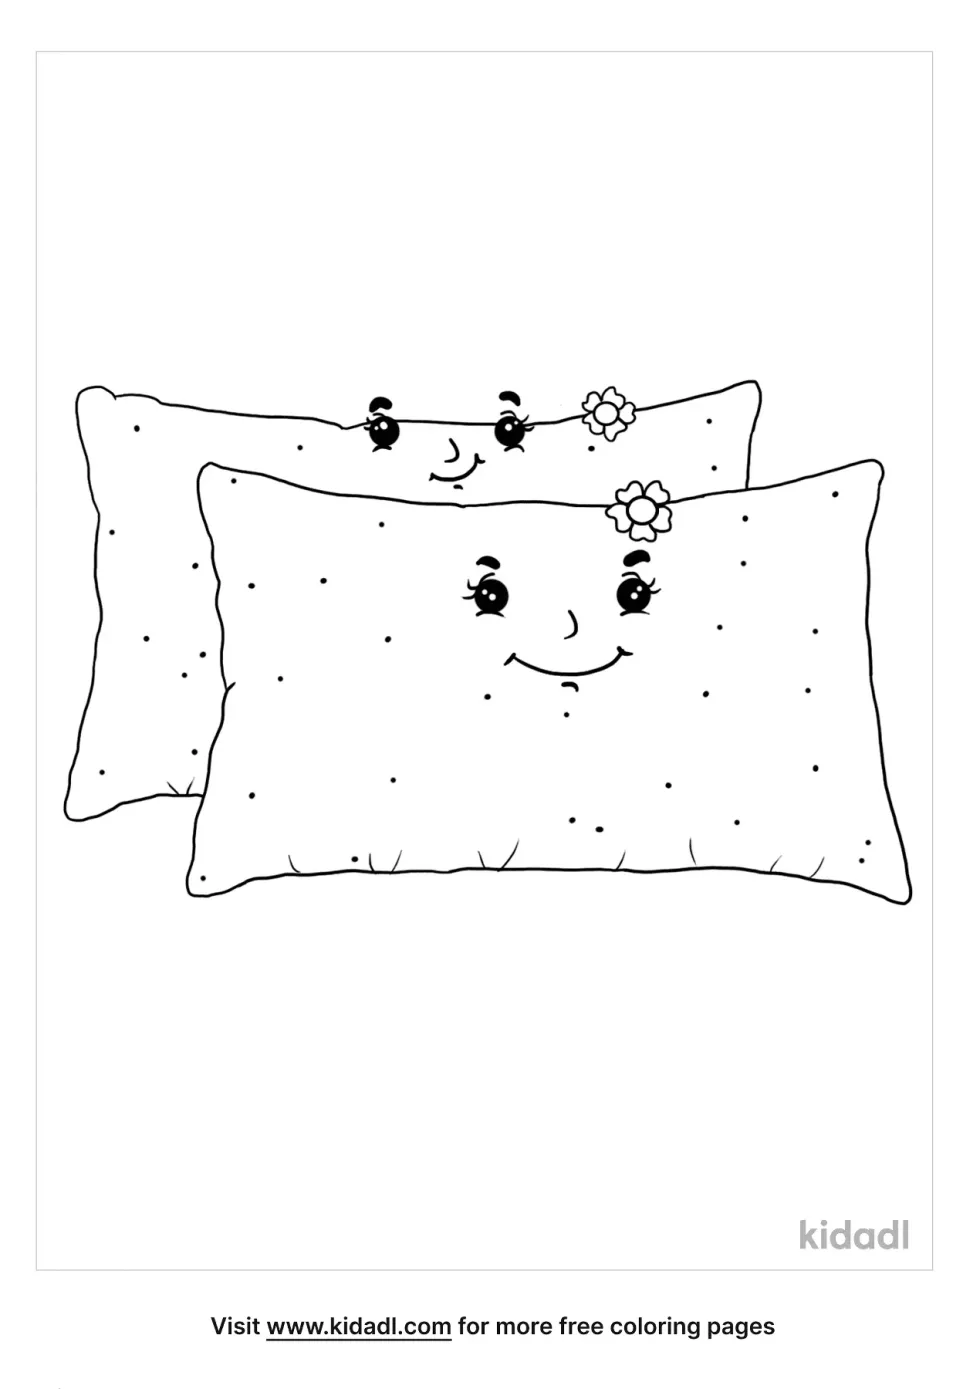 A coloring image showing 2 pillows with smiley face on it